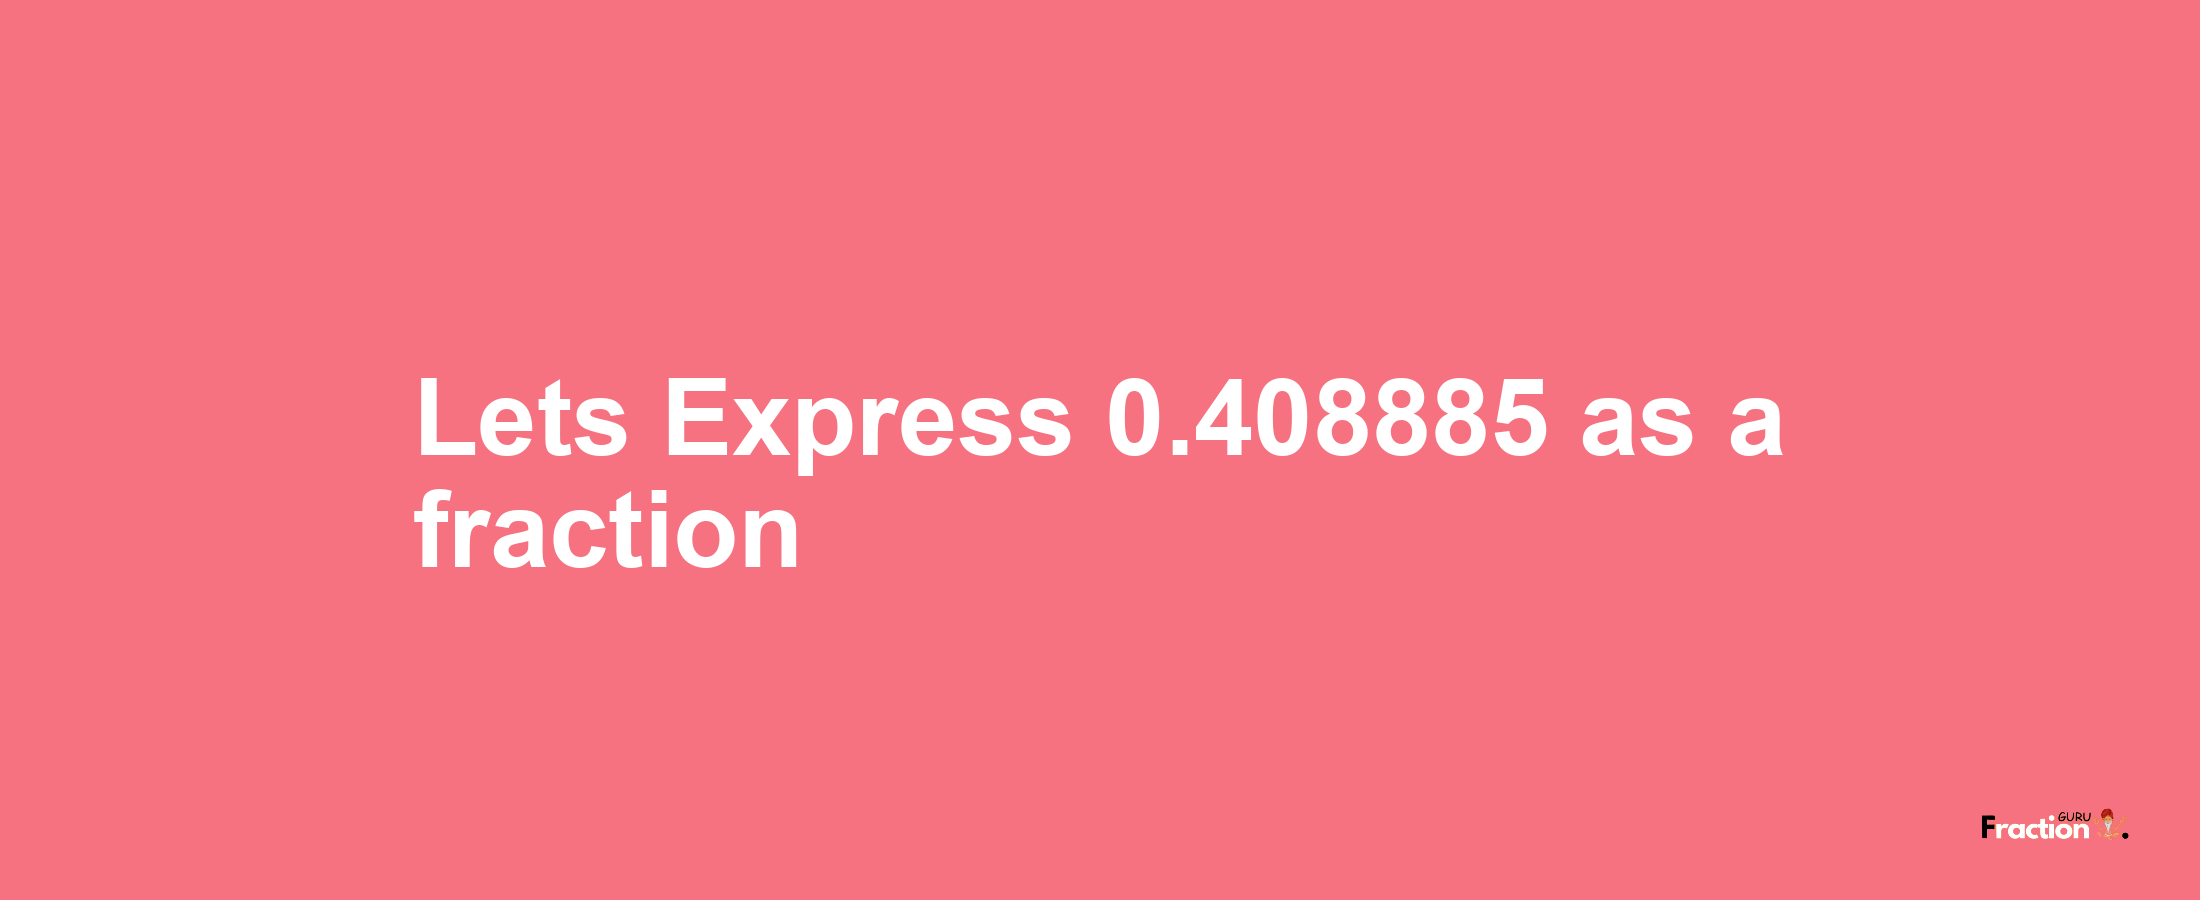 Lets Express 0.408885 as afraction